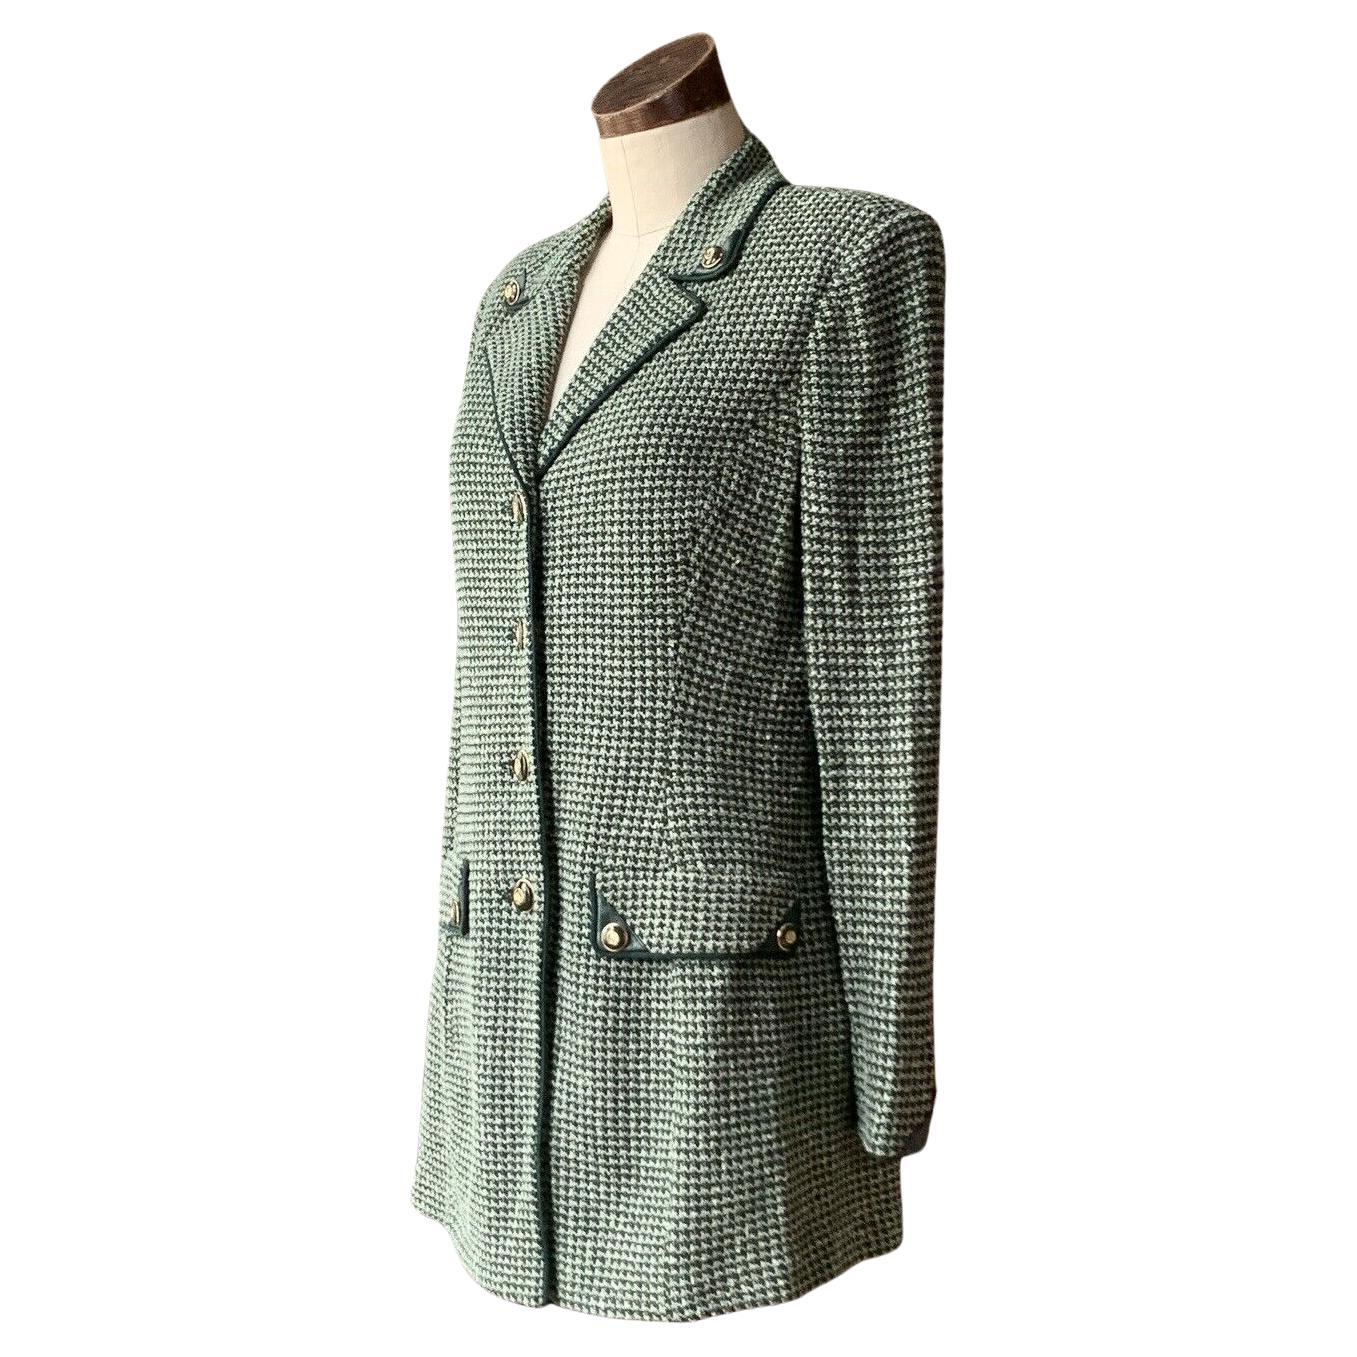 St. John Collection by Marie Gray, Knit, Made in USA, Green Vegan Leather Trim, Faux Pockets, Shoulder Pads, Iconic Buttons Front, Lapel, Pockets, Back, and Sleeve, Size 8

Measurements Laying Flat (Has Stretch):
Bust up to 19.5